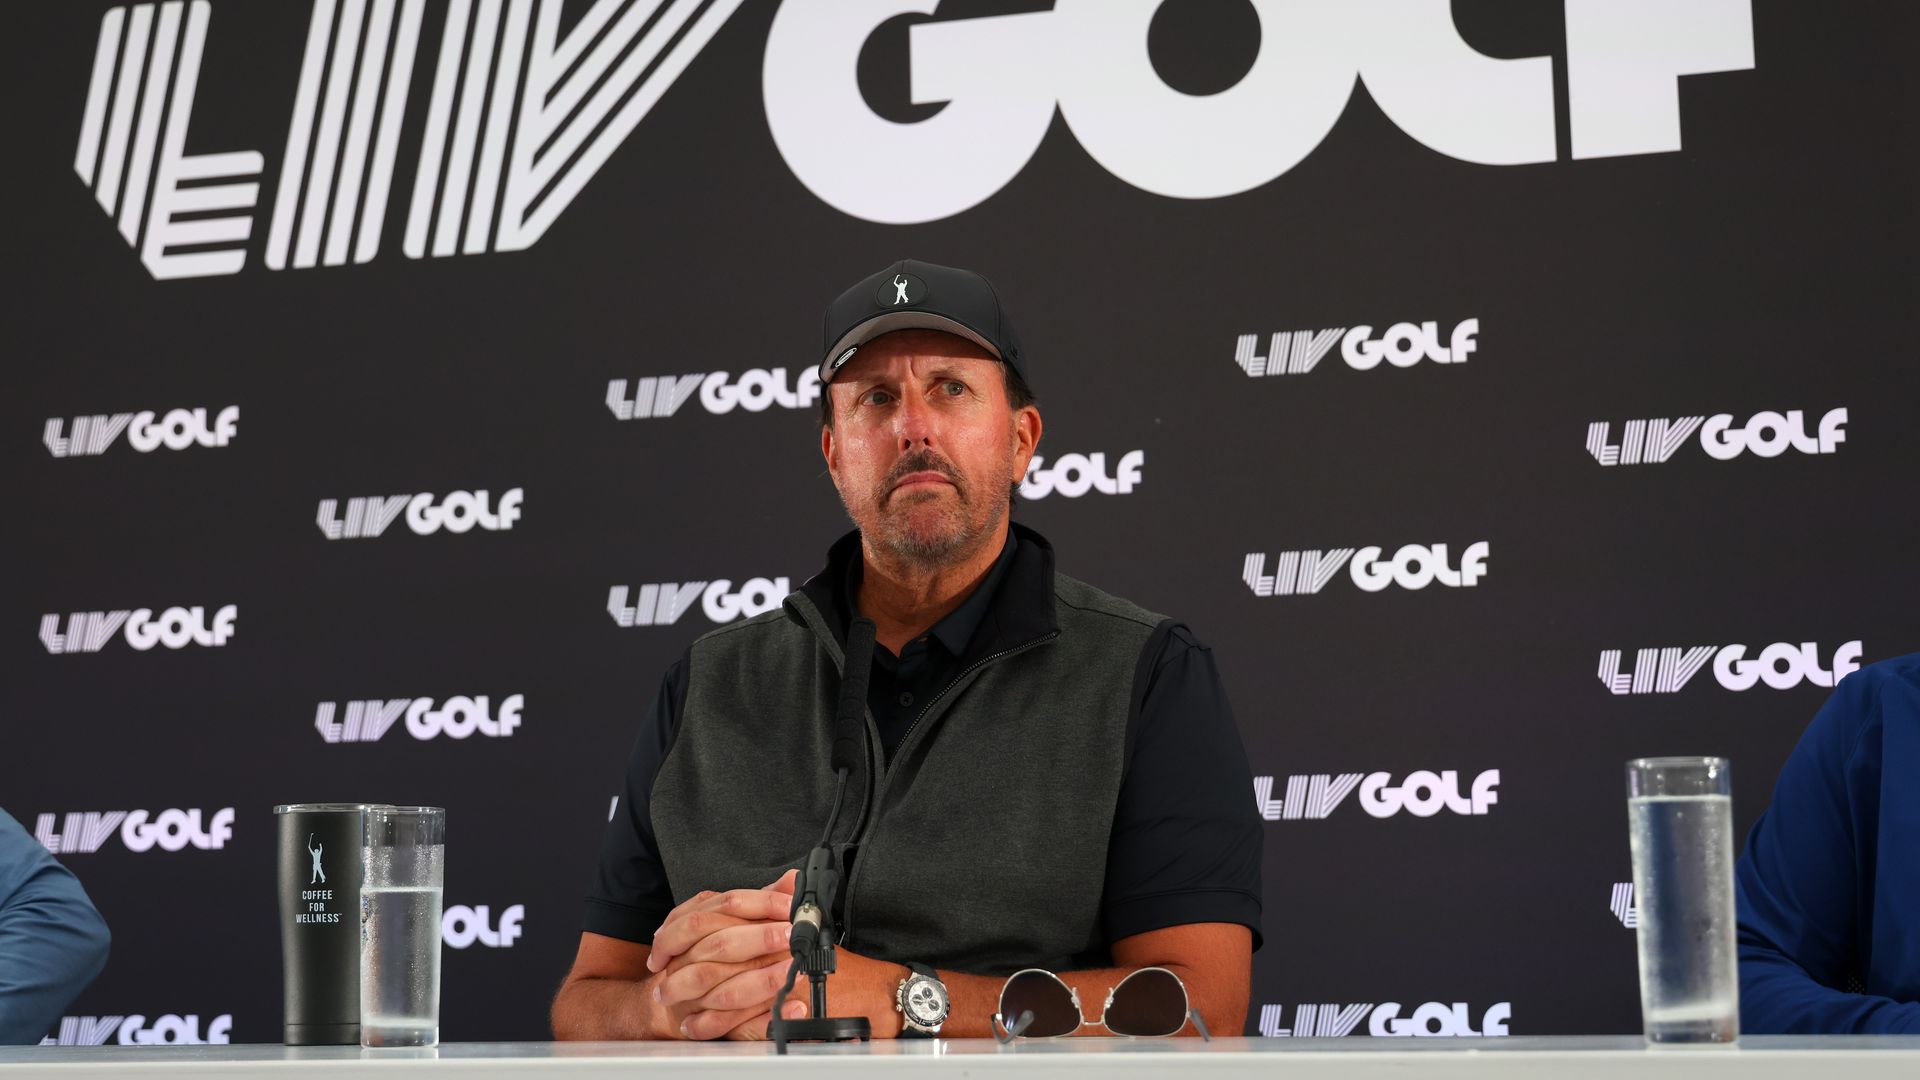 Phil Mickelson looks on during a LIV Golf press conference in London.